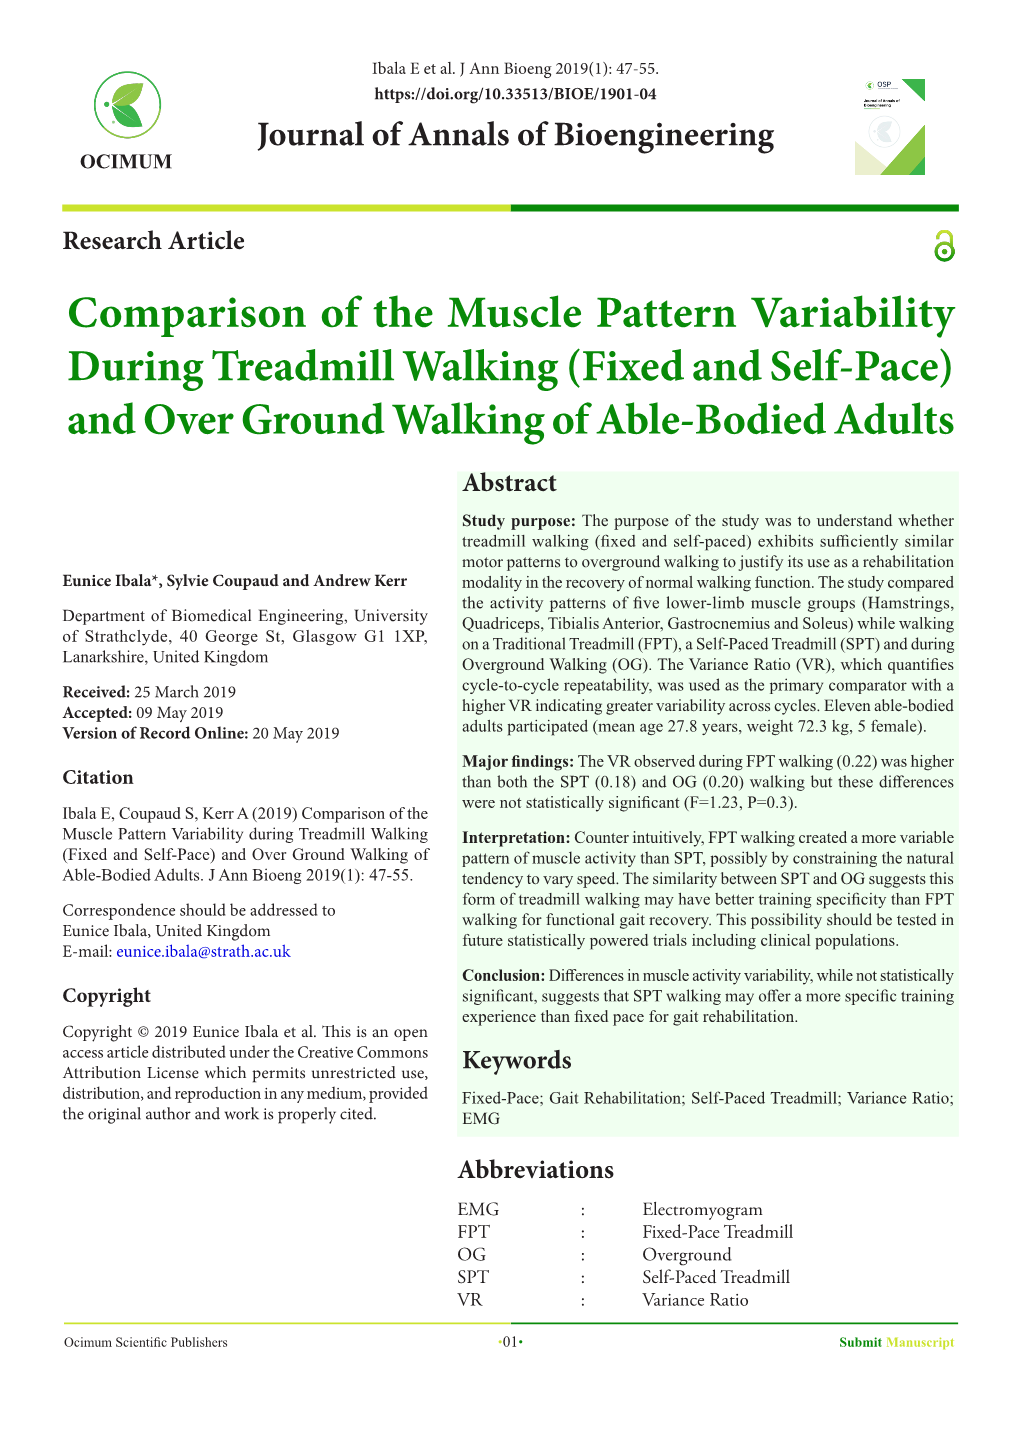 Comparison of the Muscle Pattern Variability During Treadmill